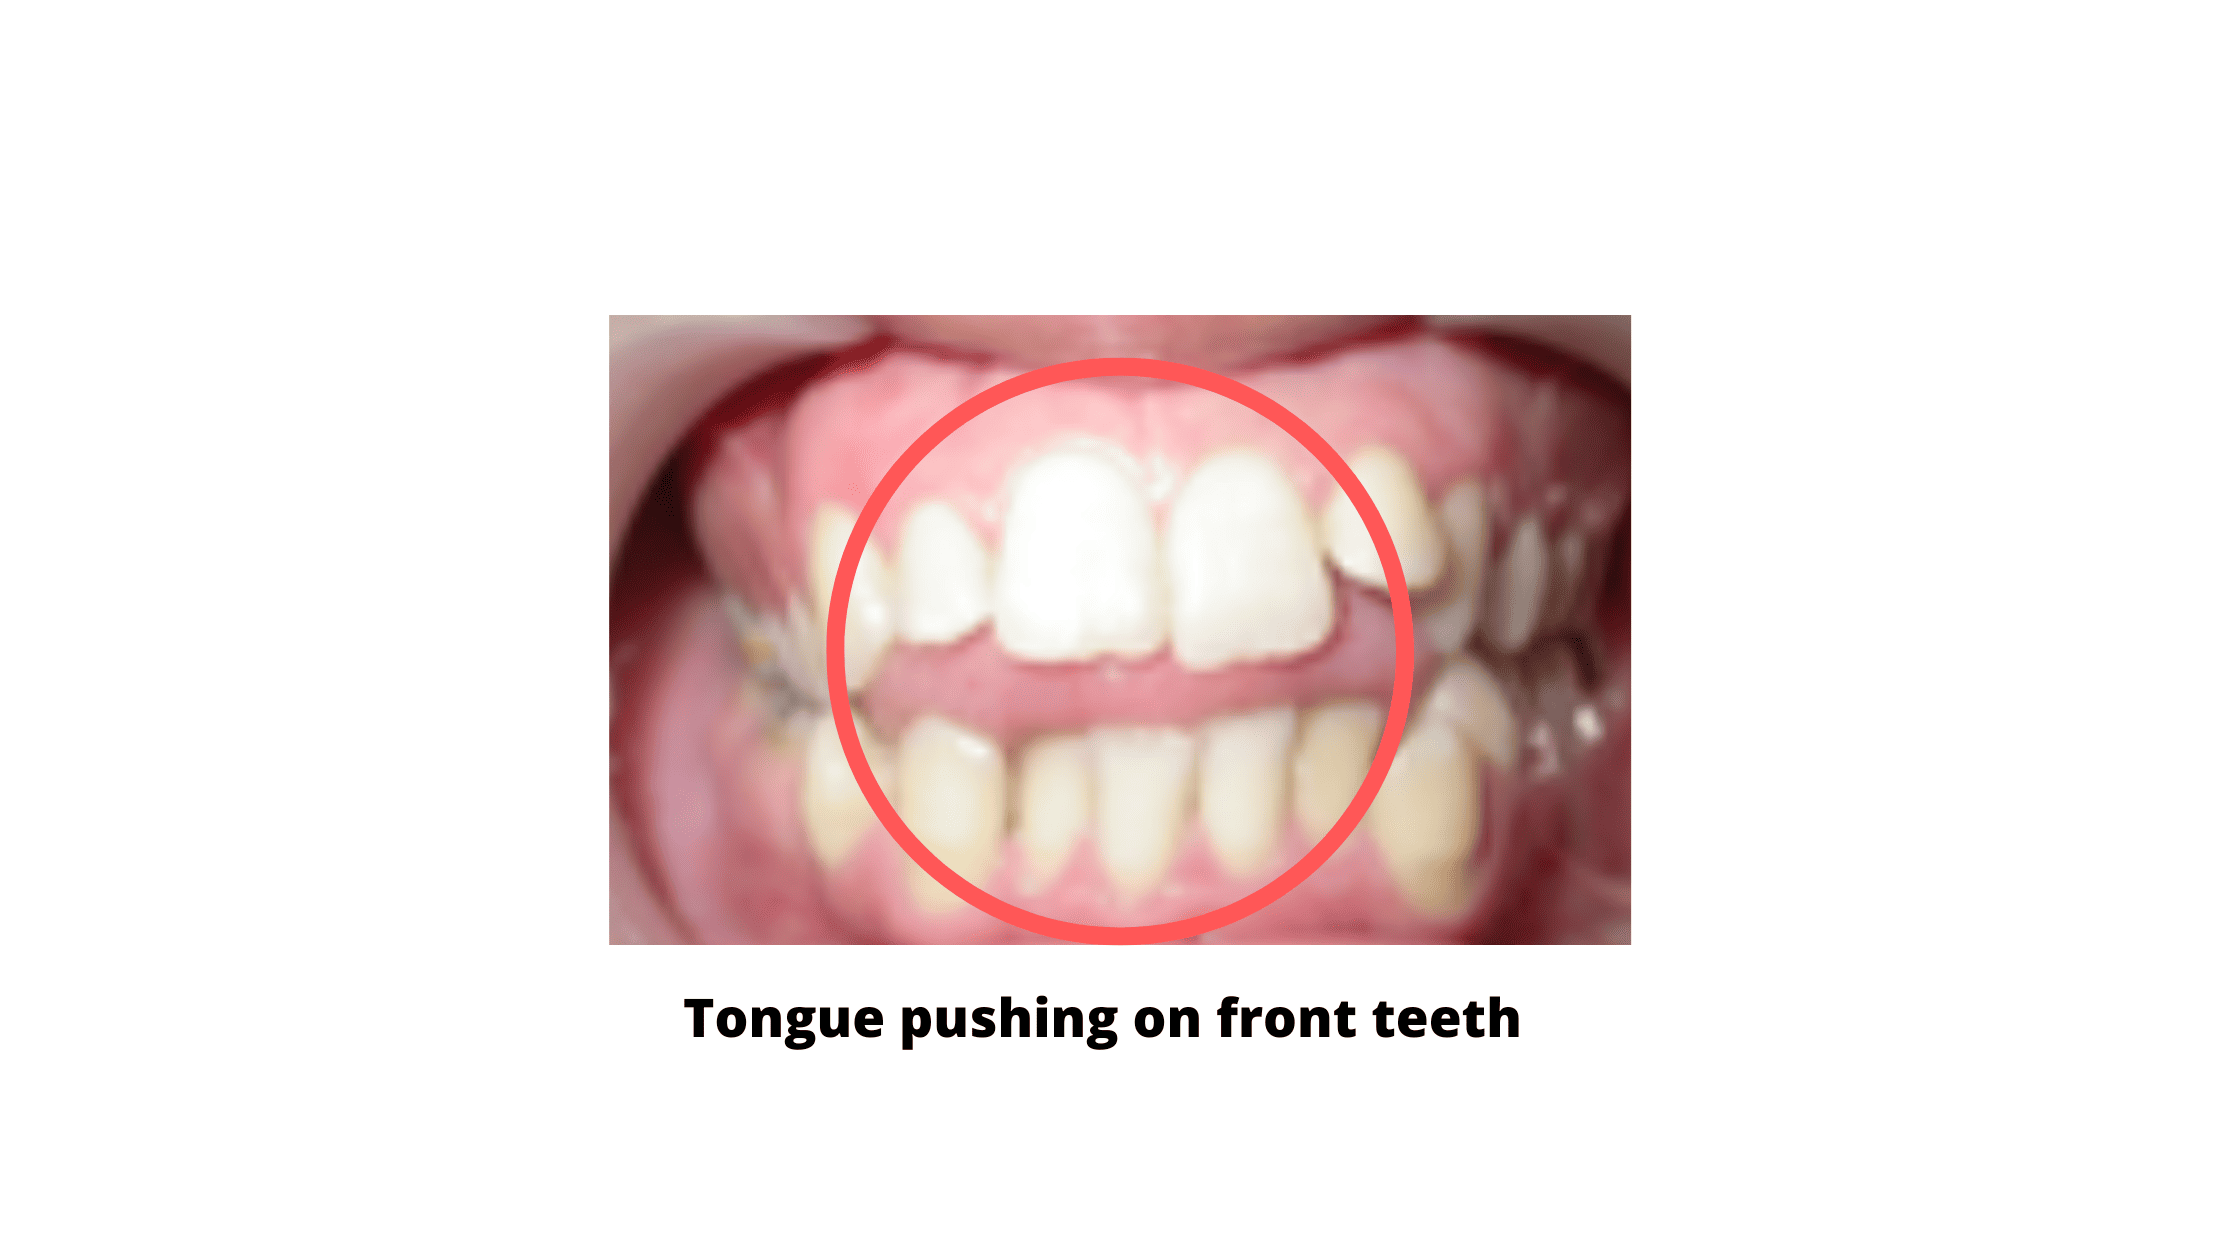 Tongue pushing on front teeth in an open bite